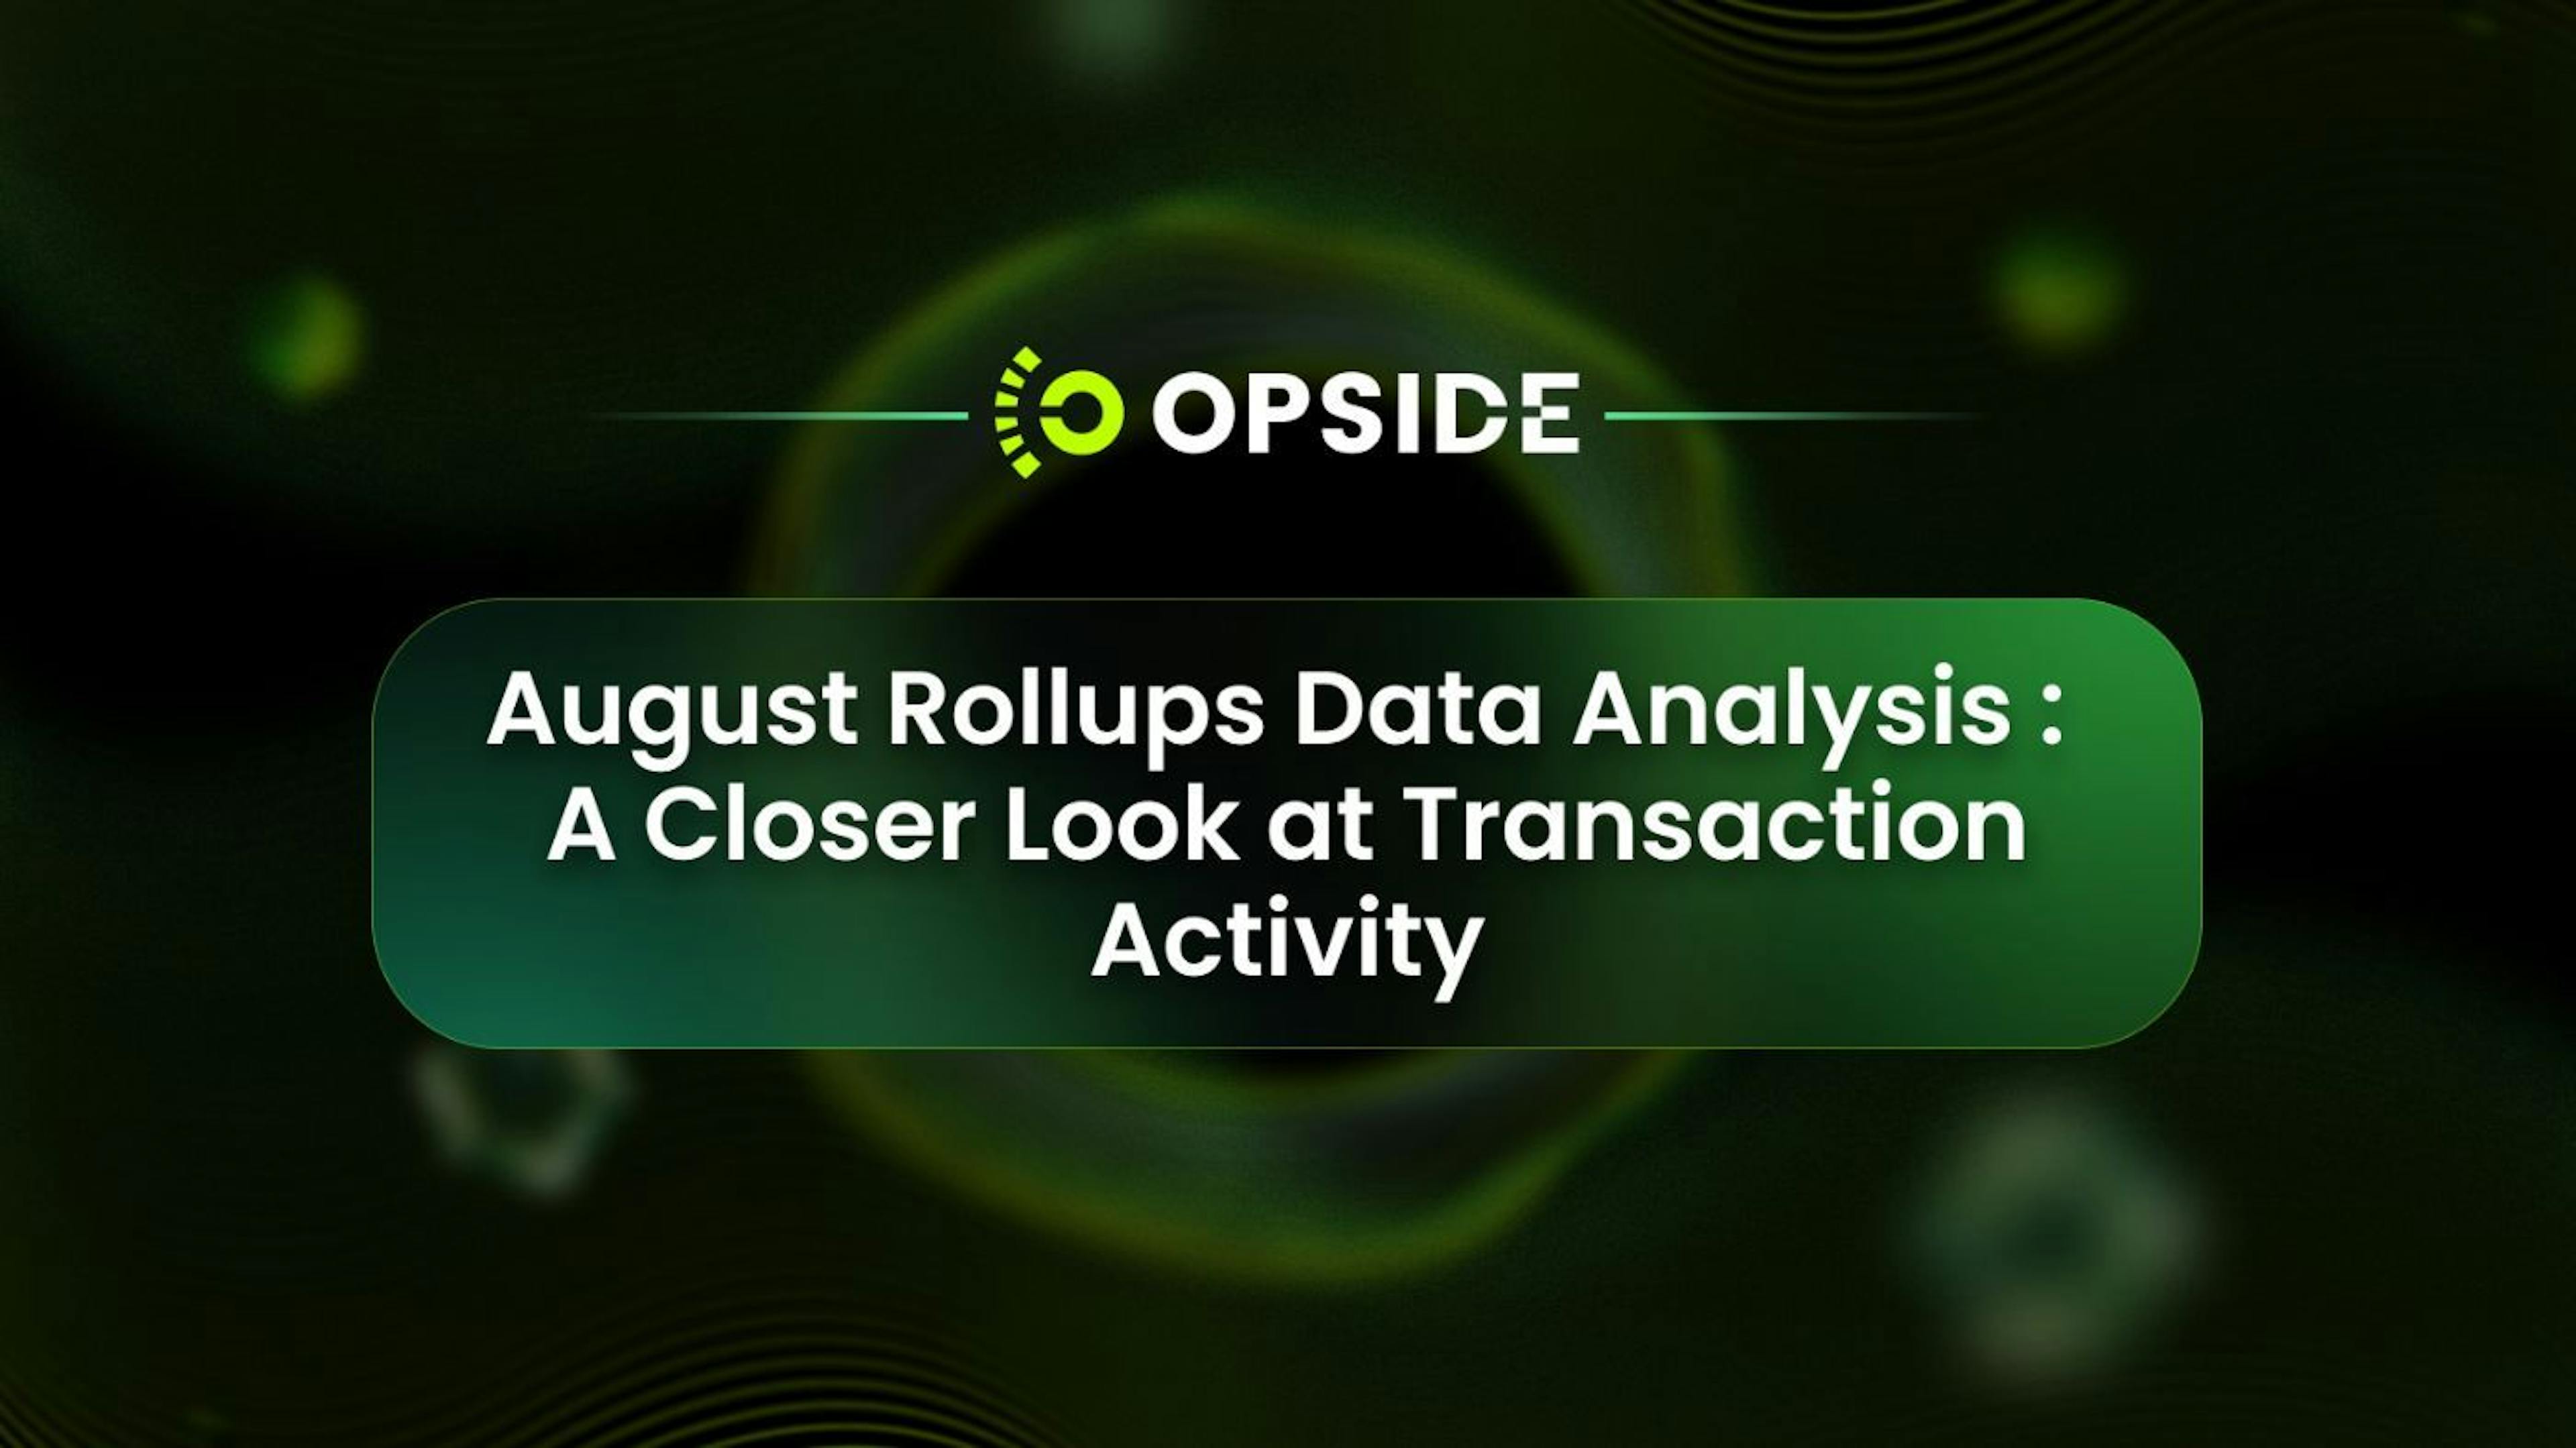 featured image - August Rollups Data Analysis: A Closer Look at Transaction Activity